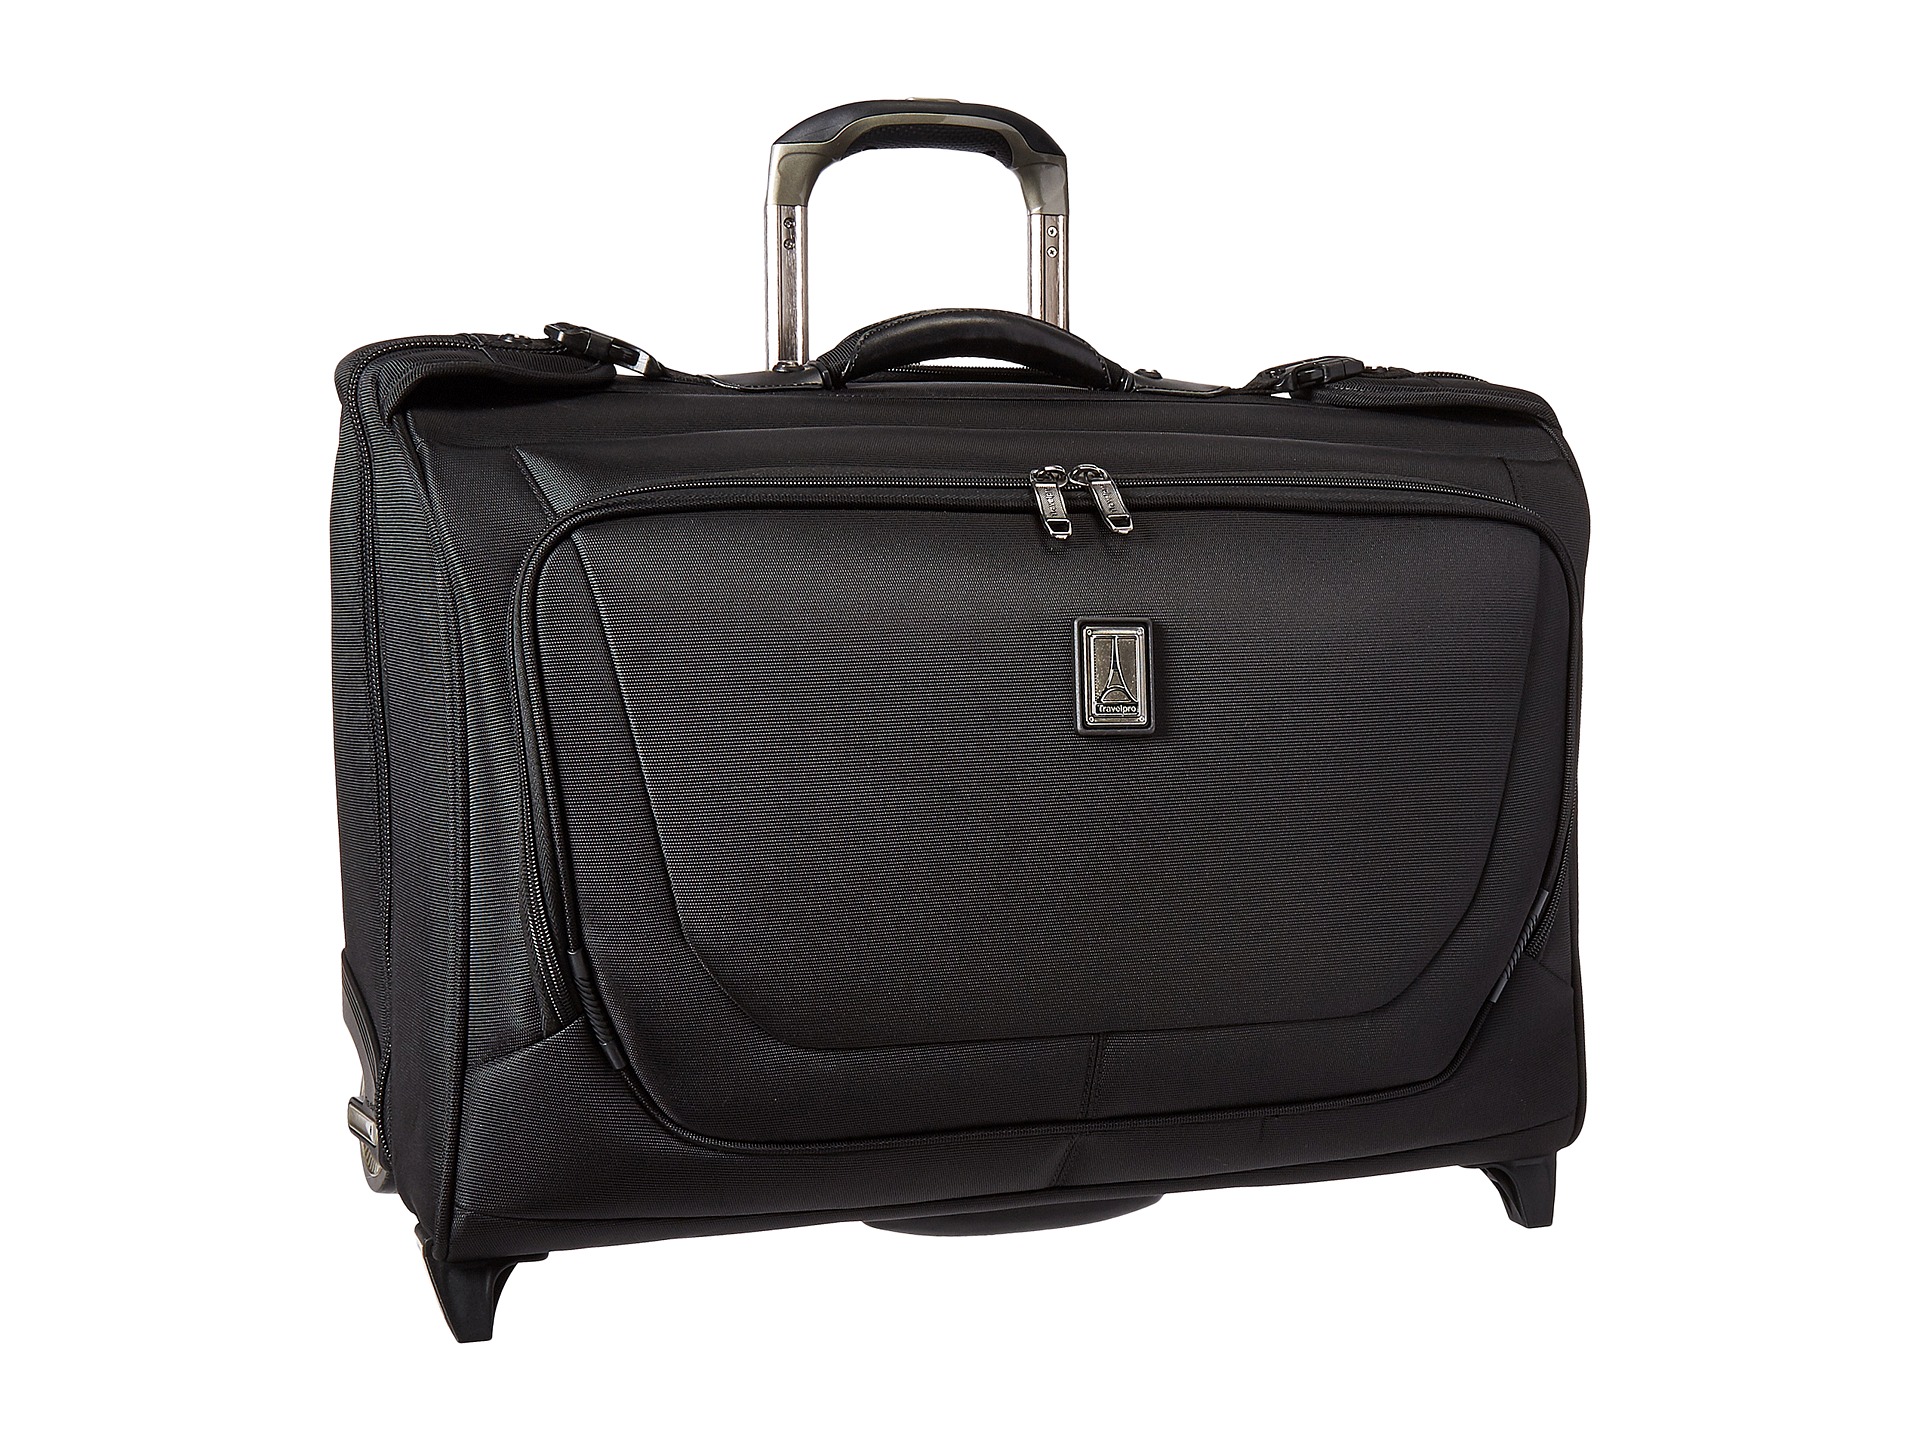 Travelpro Crew 11 - Carry-On Rolling Garment Bag - www.bagssaleusa.com Free Shipping BOTH Ways